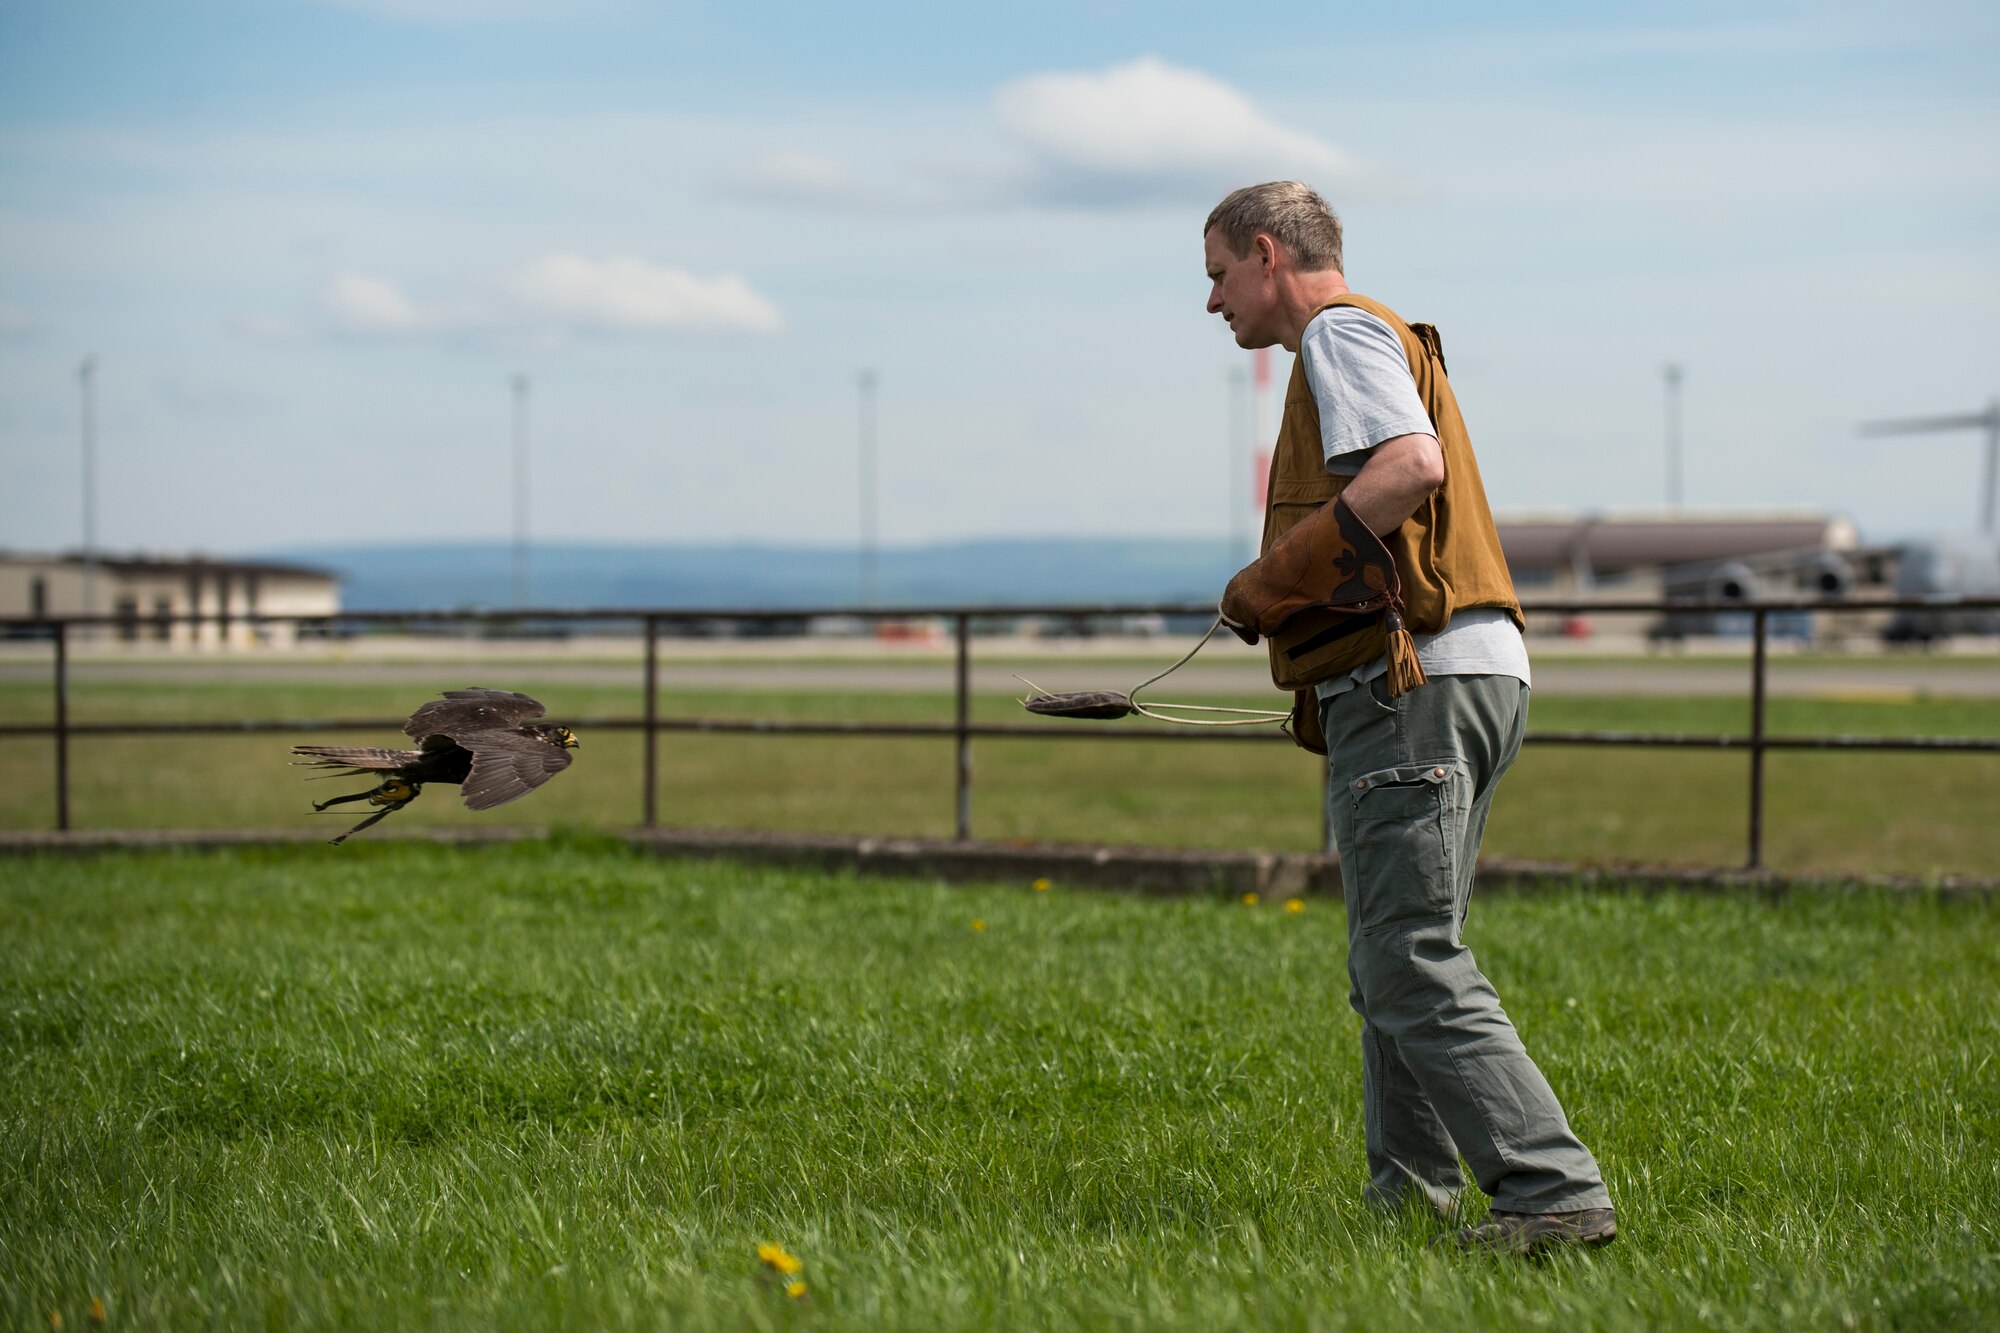 Jens Fleer, the base falconer, demonstrates the capabilities of a hunting falcon alongside the flightline at Spangdahlem Air Base, Germany, May 4, 2015. The falcon’s primary purpose is to prevent habituation of rabbits, hares, geese, crows and other smaller birds on or near the flightlline. (U.S. Air Force photo by Airman 1st Class Luke Kitterman/Released)